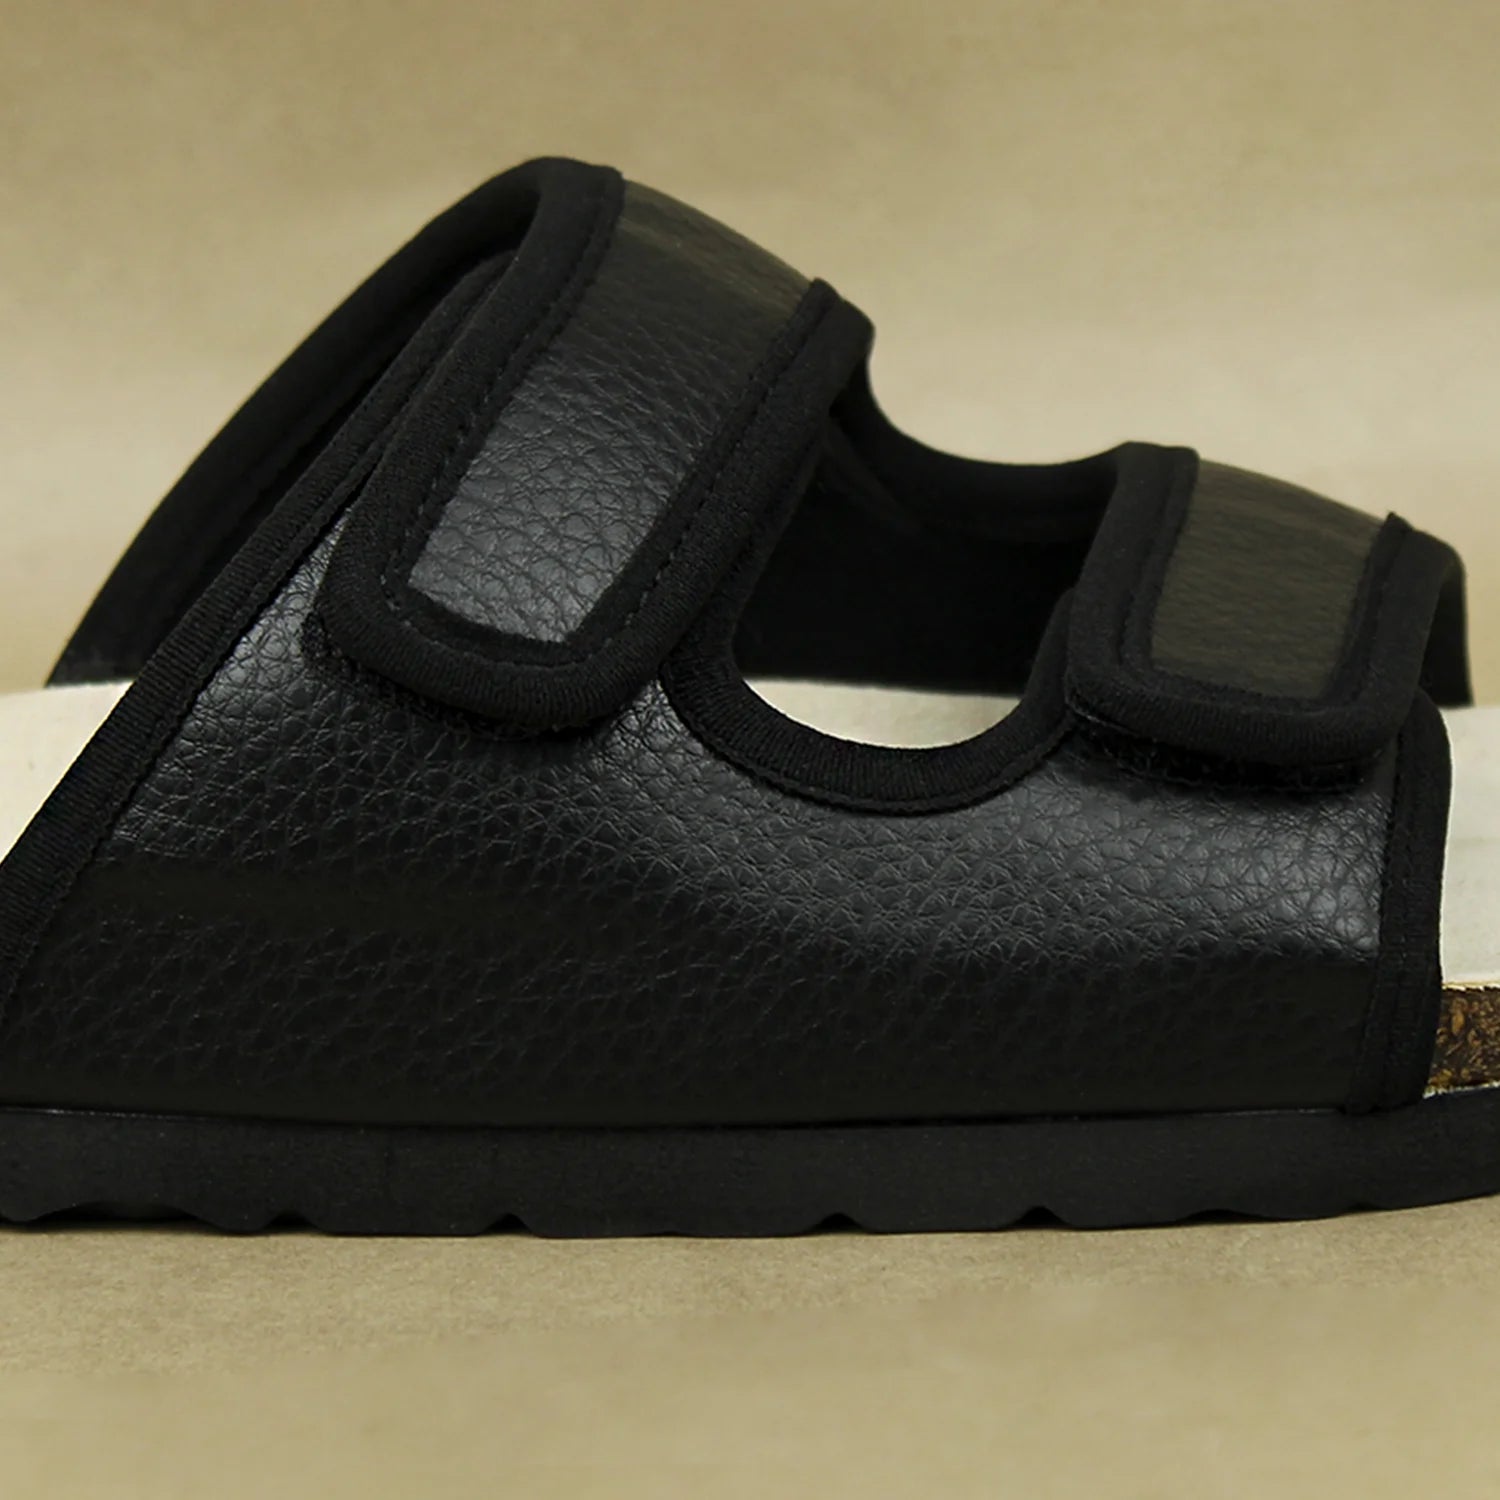 Comfortable black cork sandals with strong Velcro closure